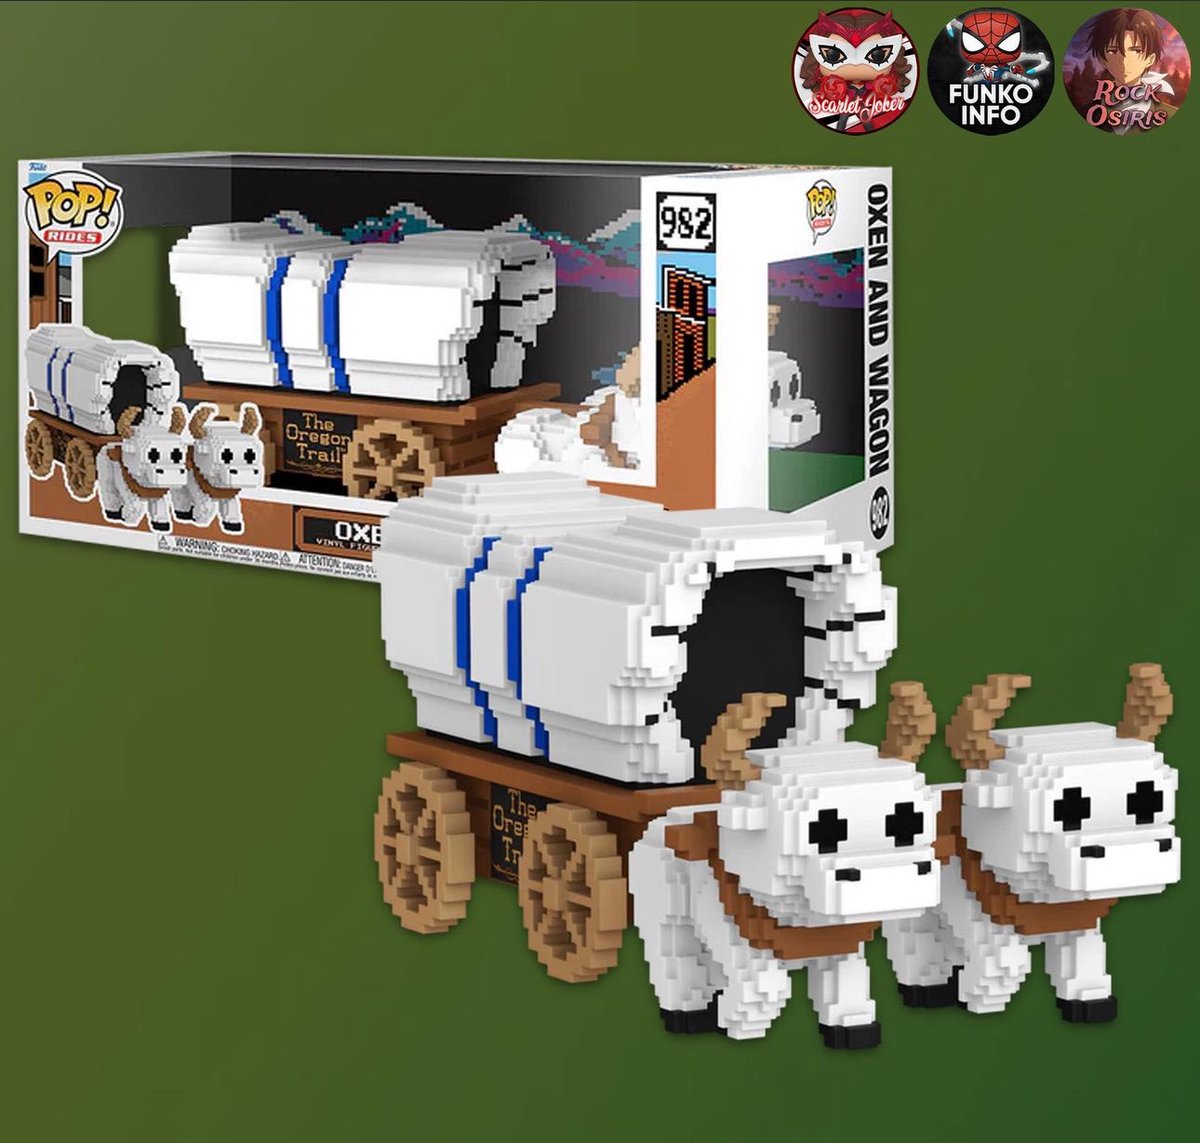 First look at Oregon Trail Pop Ride!
.
Repost @rockosiris_
#OregonTrail #Funko #FunkoPop #FunkoPopVinyl #Pop #PopVinyl #Collectibles #Collectible #FunkoCollector #FunkoPops #Collector #Toy #Toys #DisTrackers